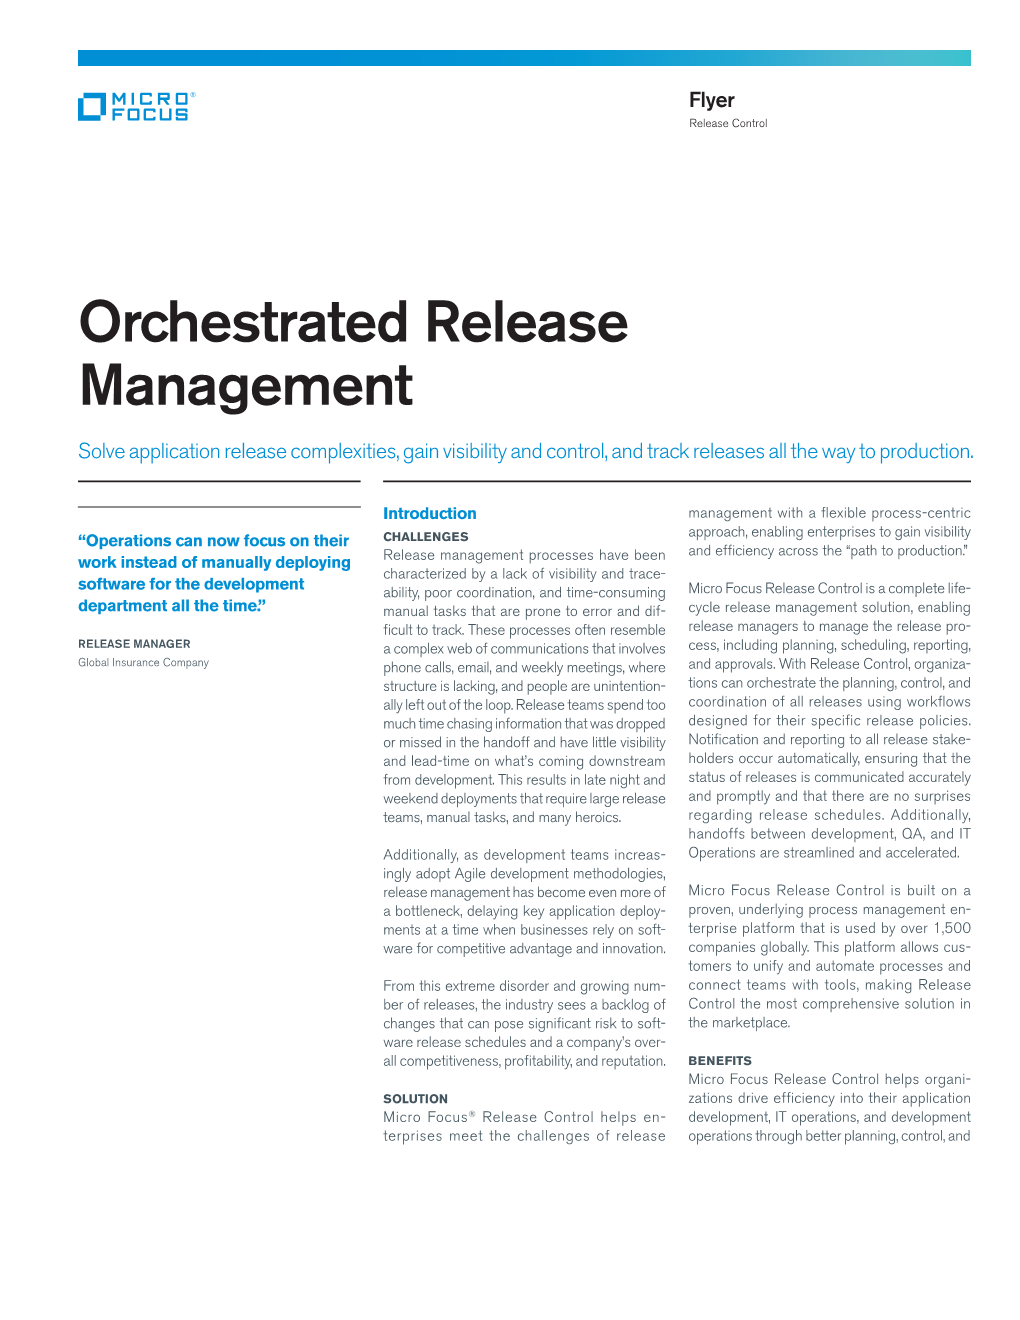 Orchestrated Release Management